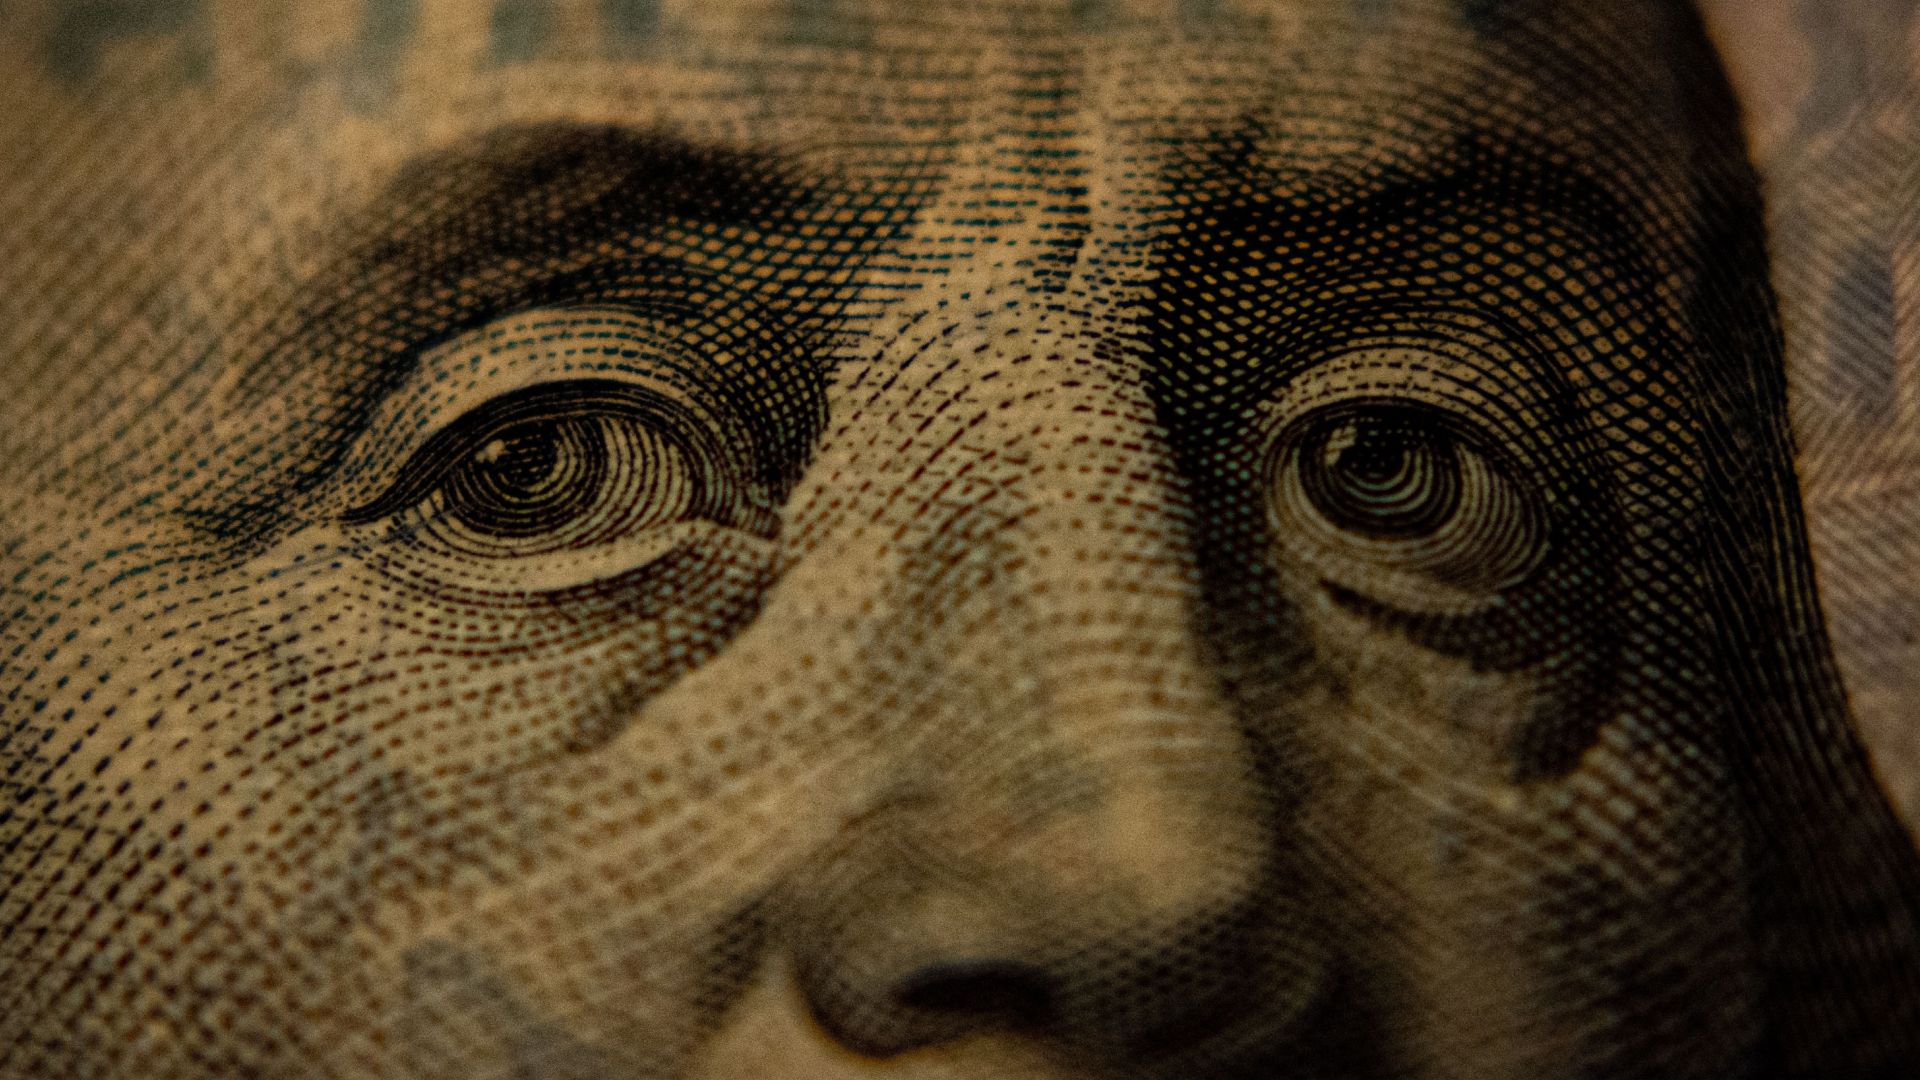 Close up image of Benjamin Franklin's face on a $100 bill.